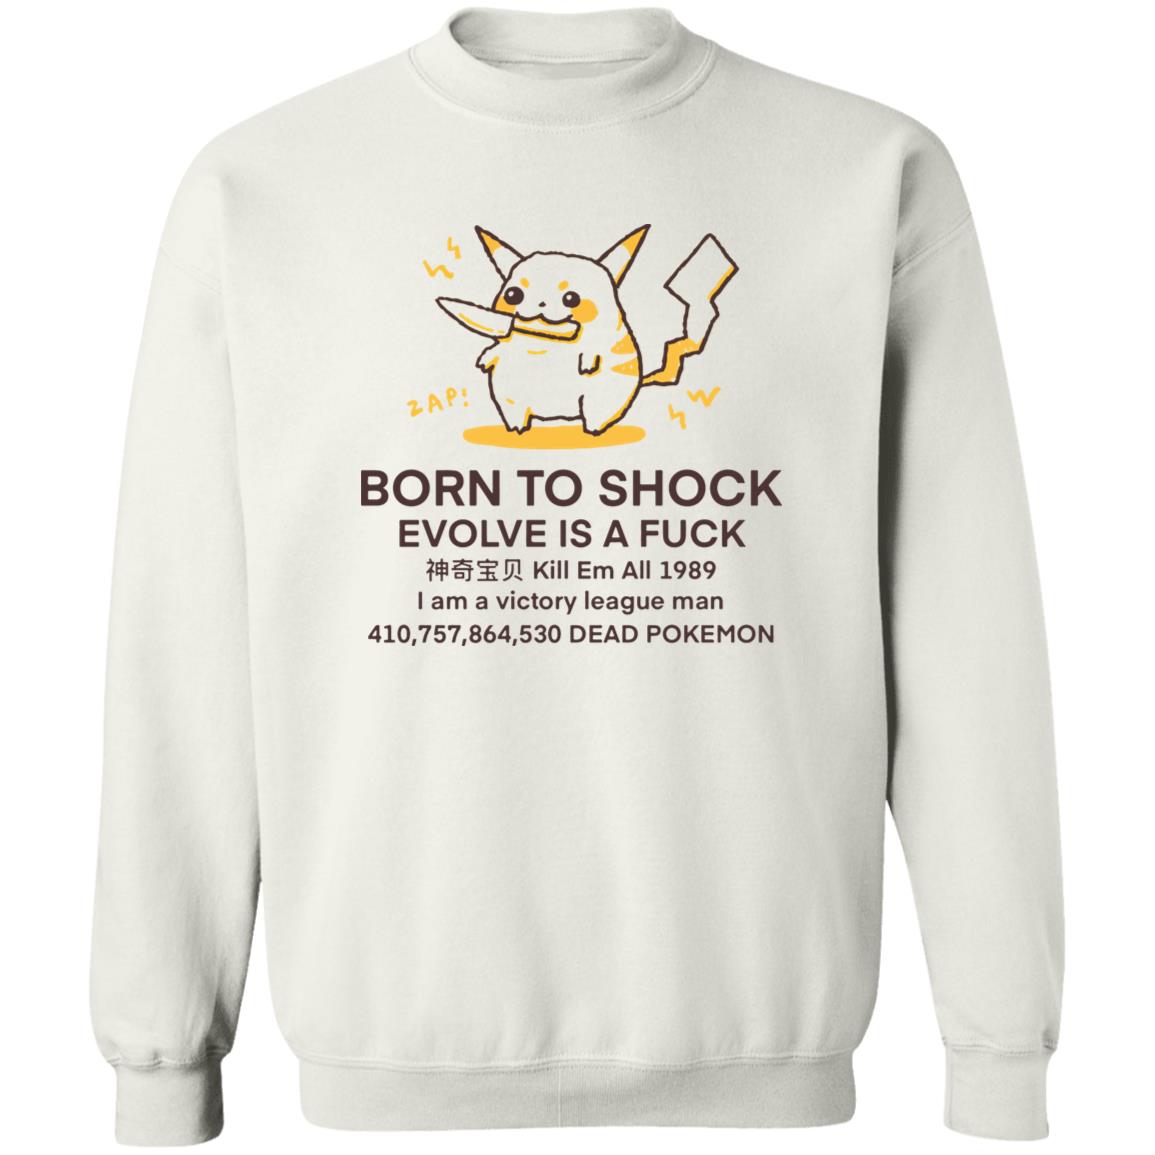 Born To Shock Evolve Is A Fck Shirt 1